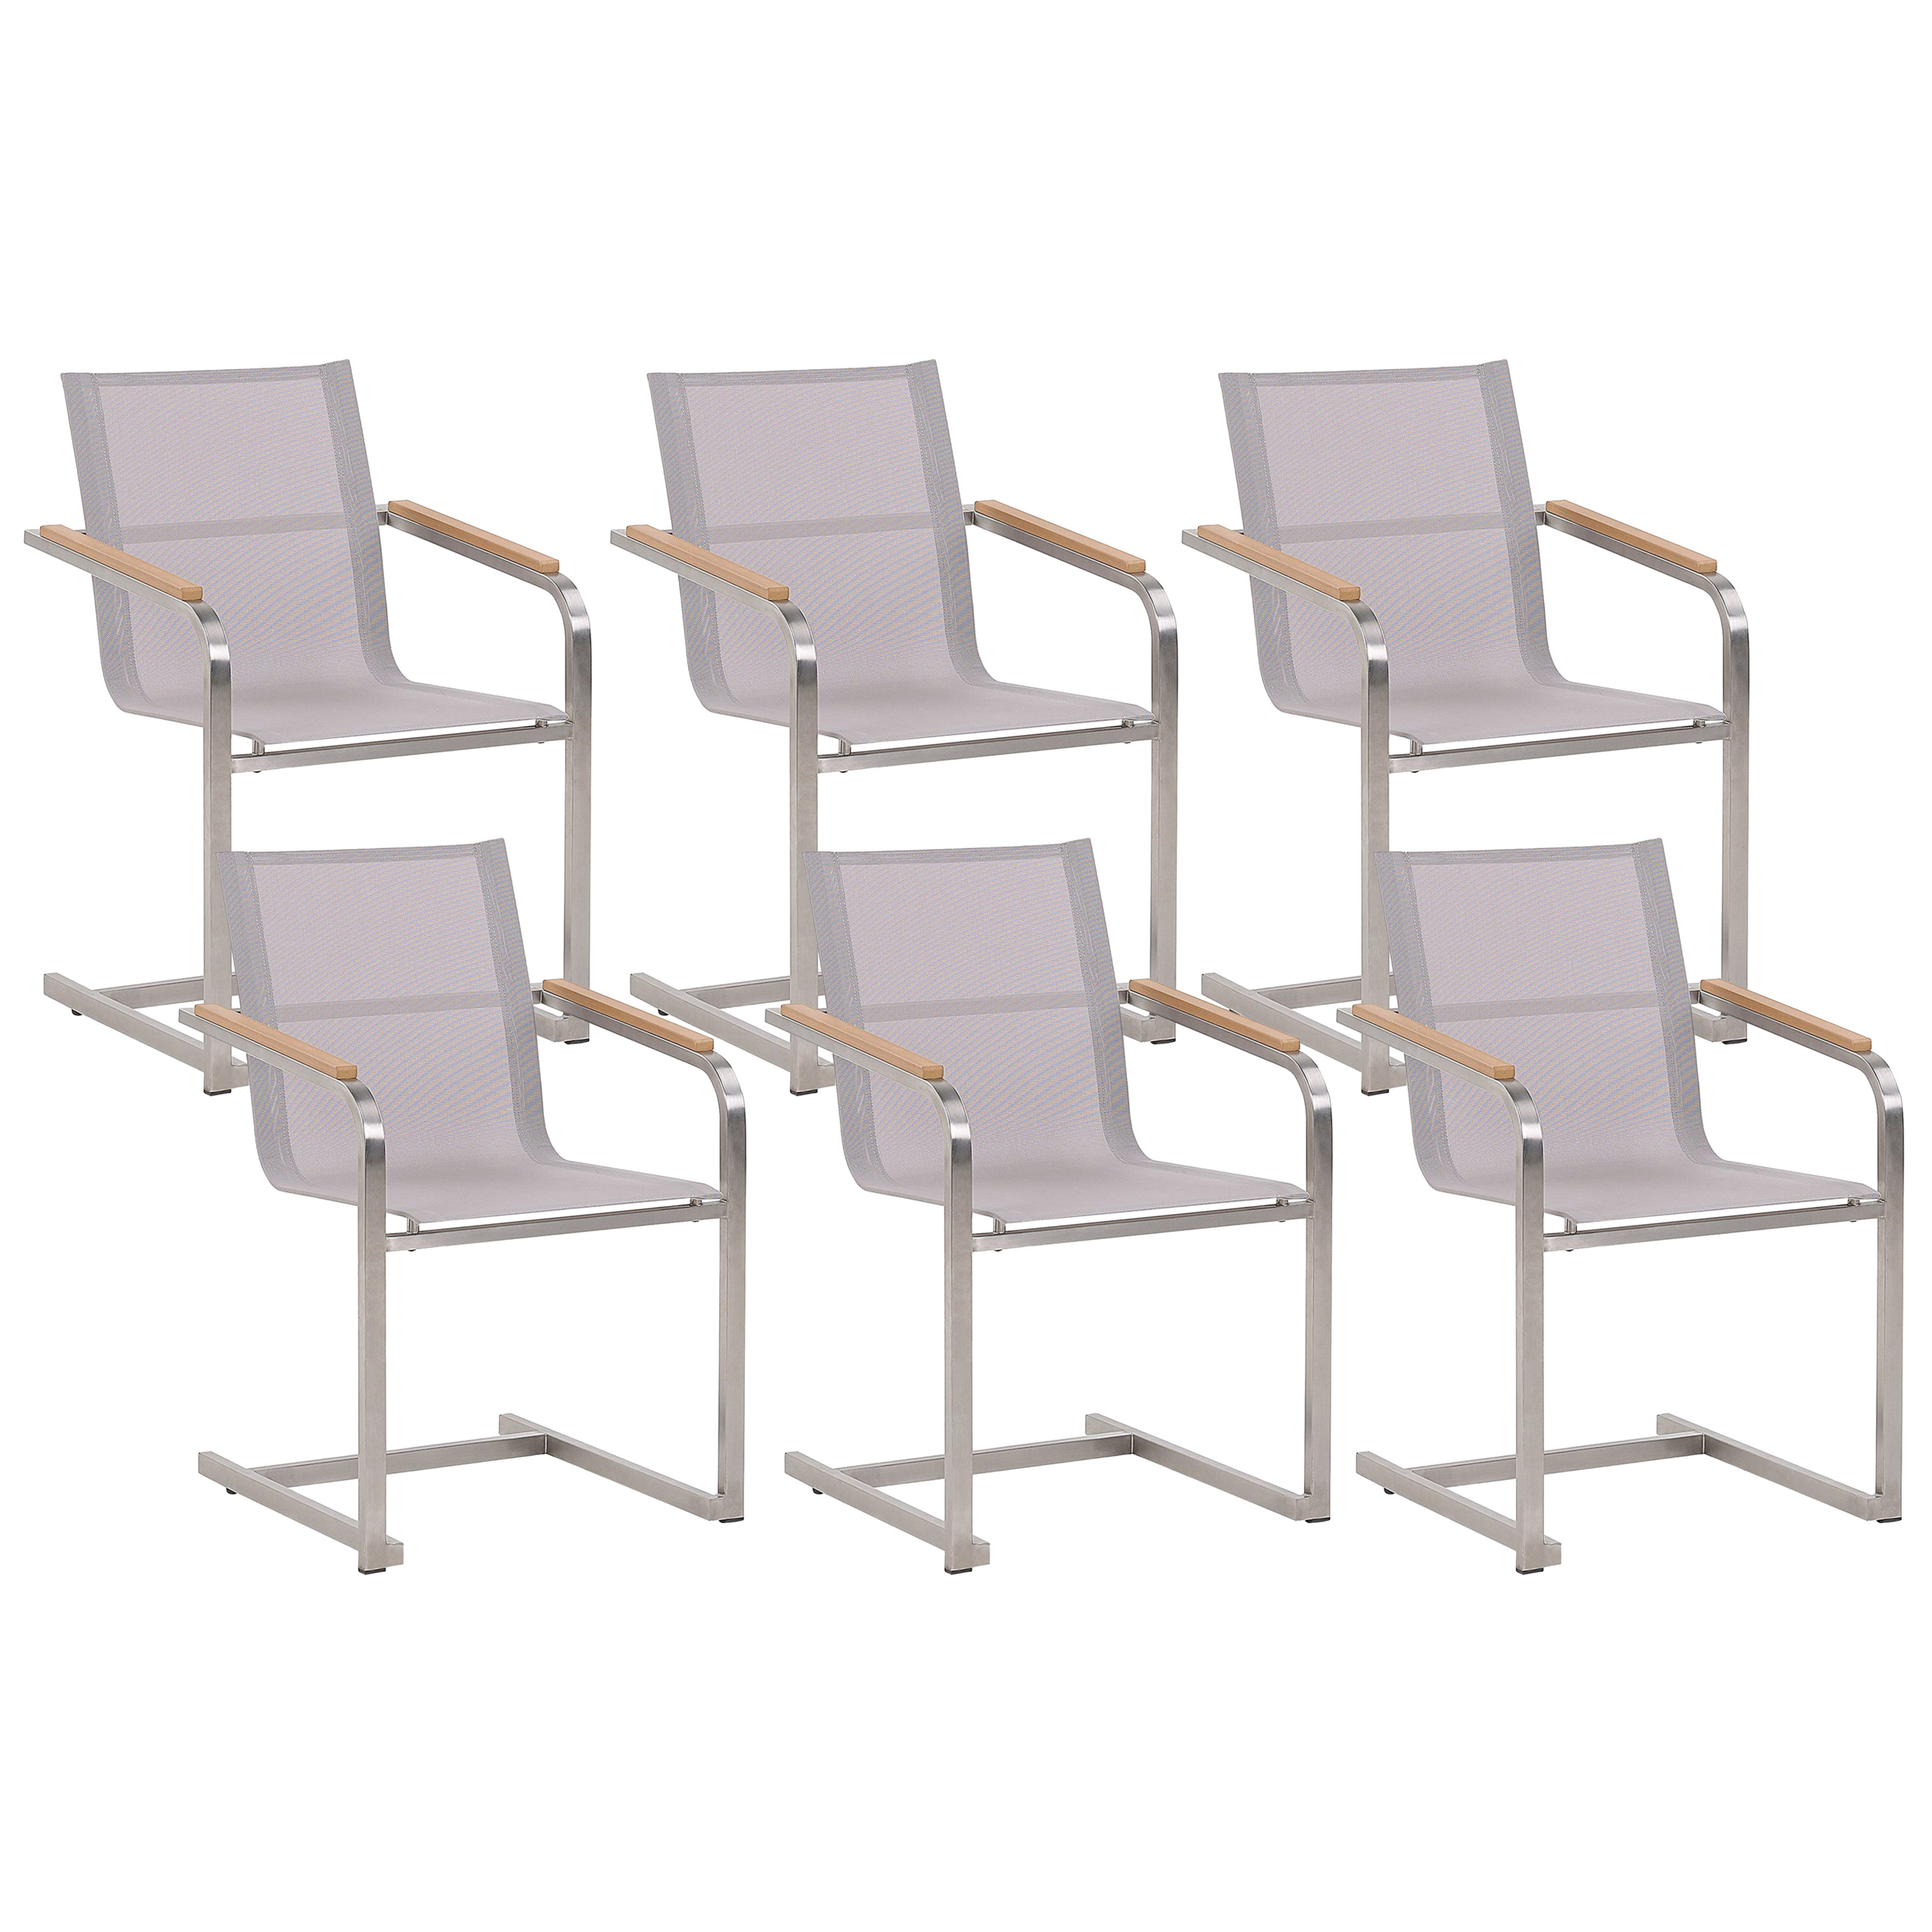 Beliani Set of 6 Garden Chairs Beige Synthetic Seat Stainless Steel Frame Cantilever Style